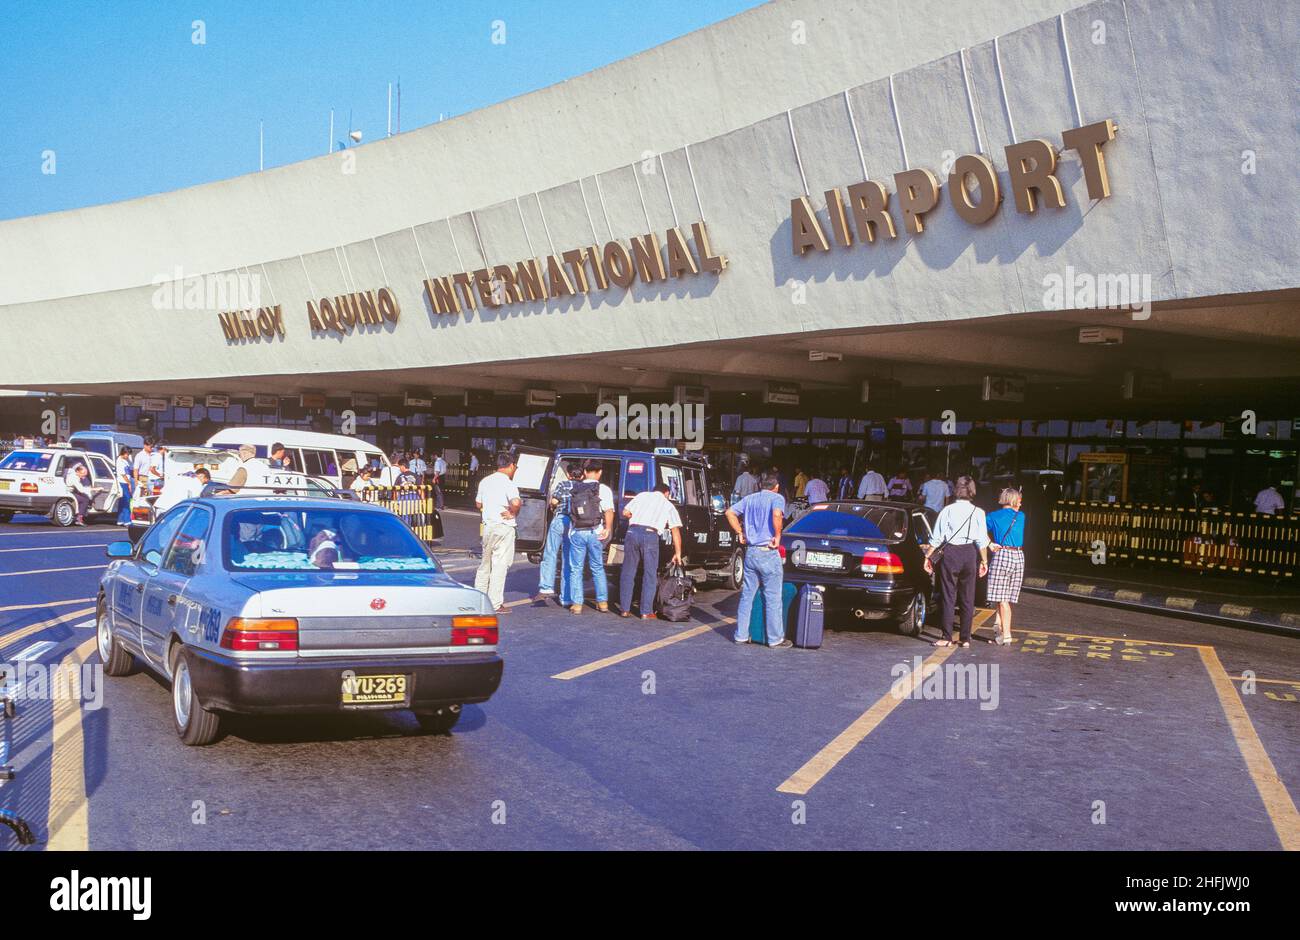 Ninoy Aquino International Airport (NAIA), formerly known and still commonly referred to as Manila International Airport, is the airport serving Manila and its surrounding area. The airport is named after Senator Benigno 'Ninoy' Aquino Jr., who was assassinated at the airport in 1983. Pictured: the exterior of NAIA Airport. Stock Photo